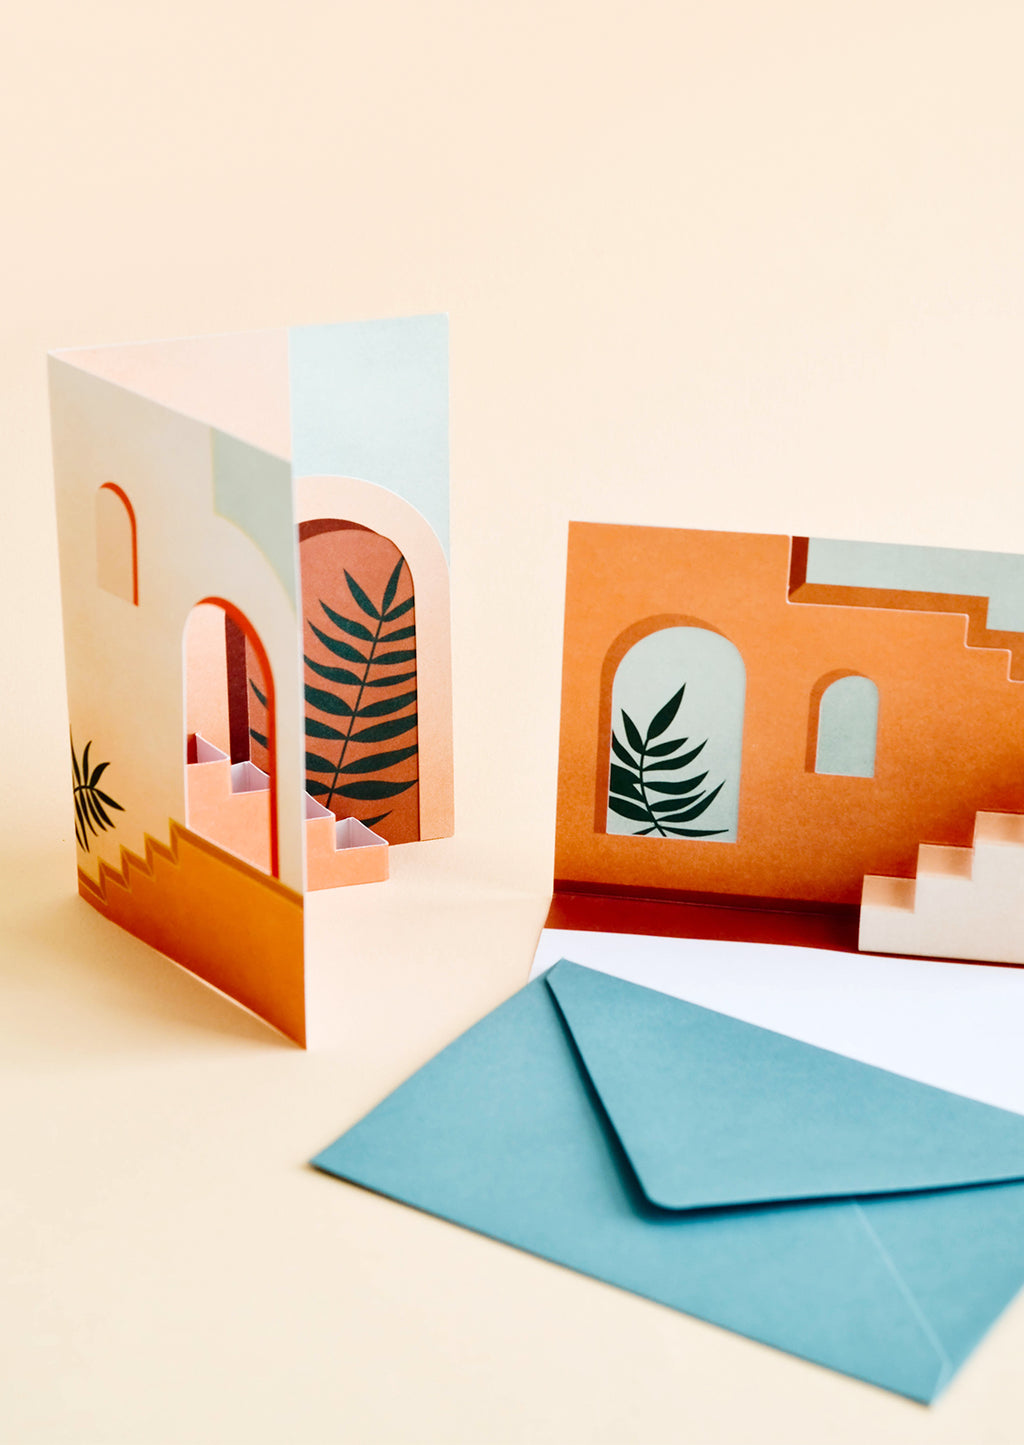 2: Greeting cards open to reveal three dimensional interior